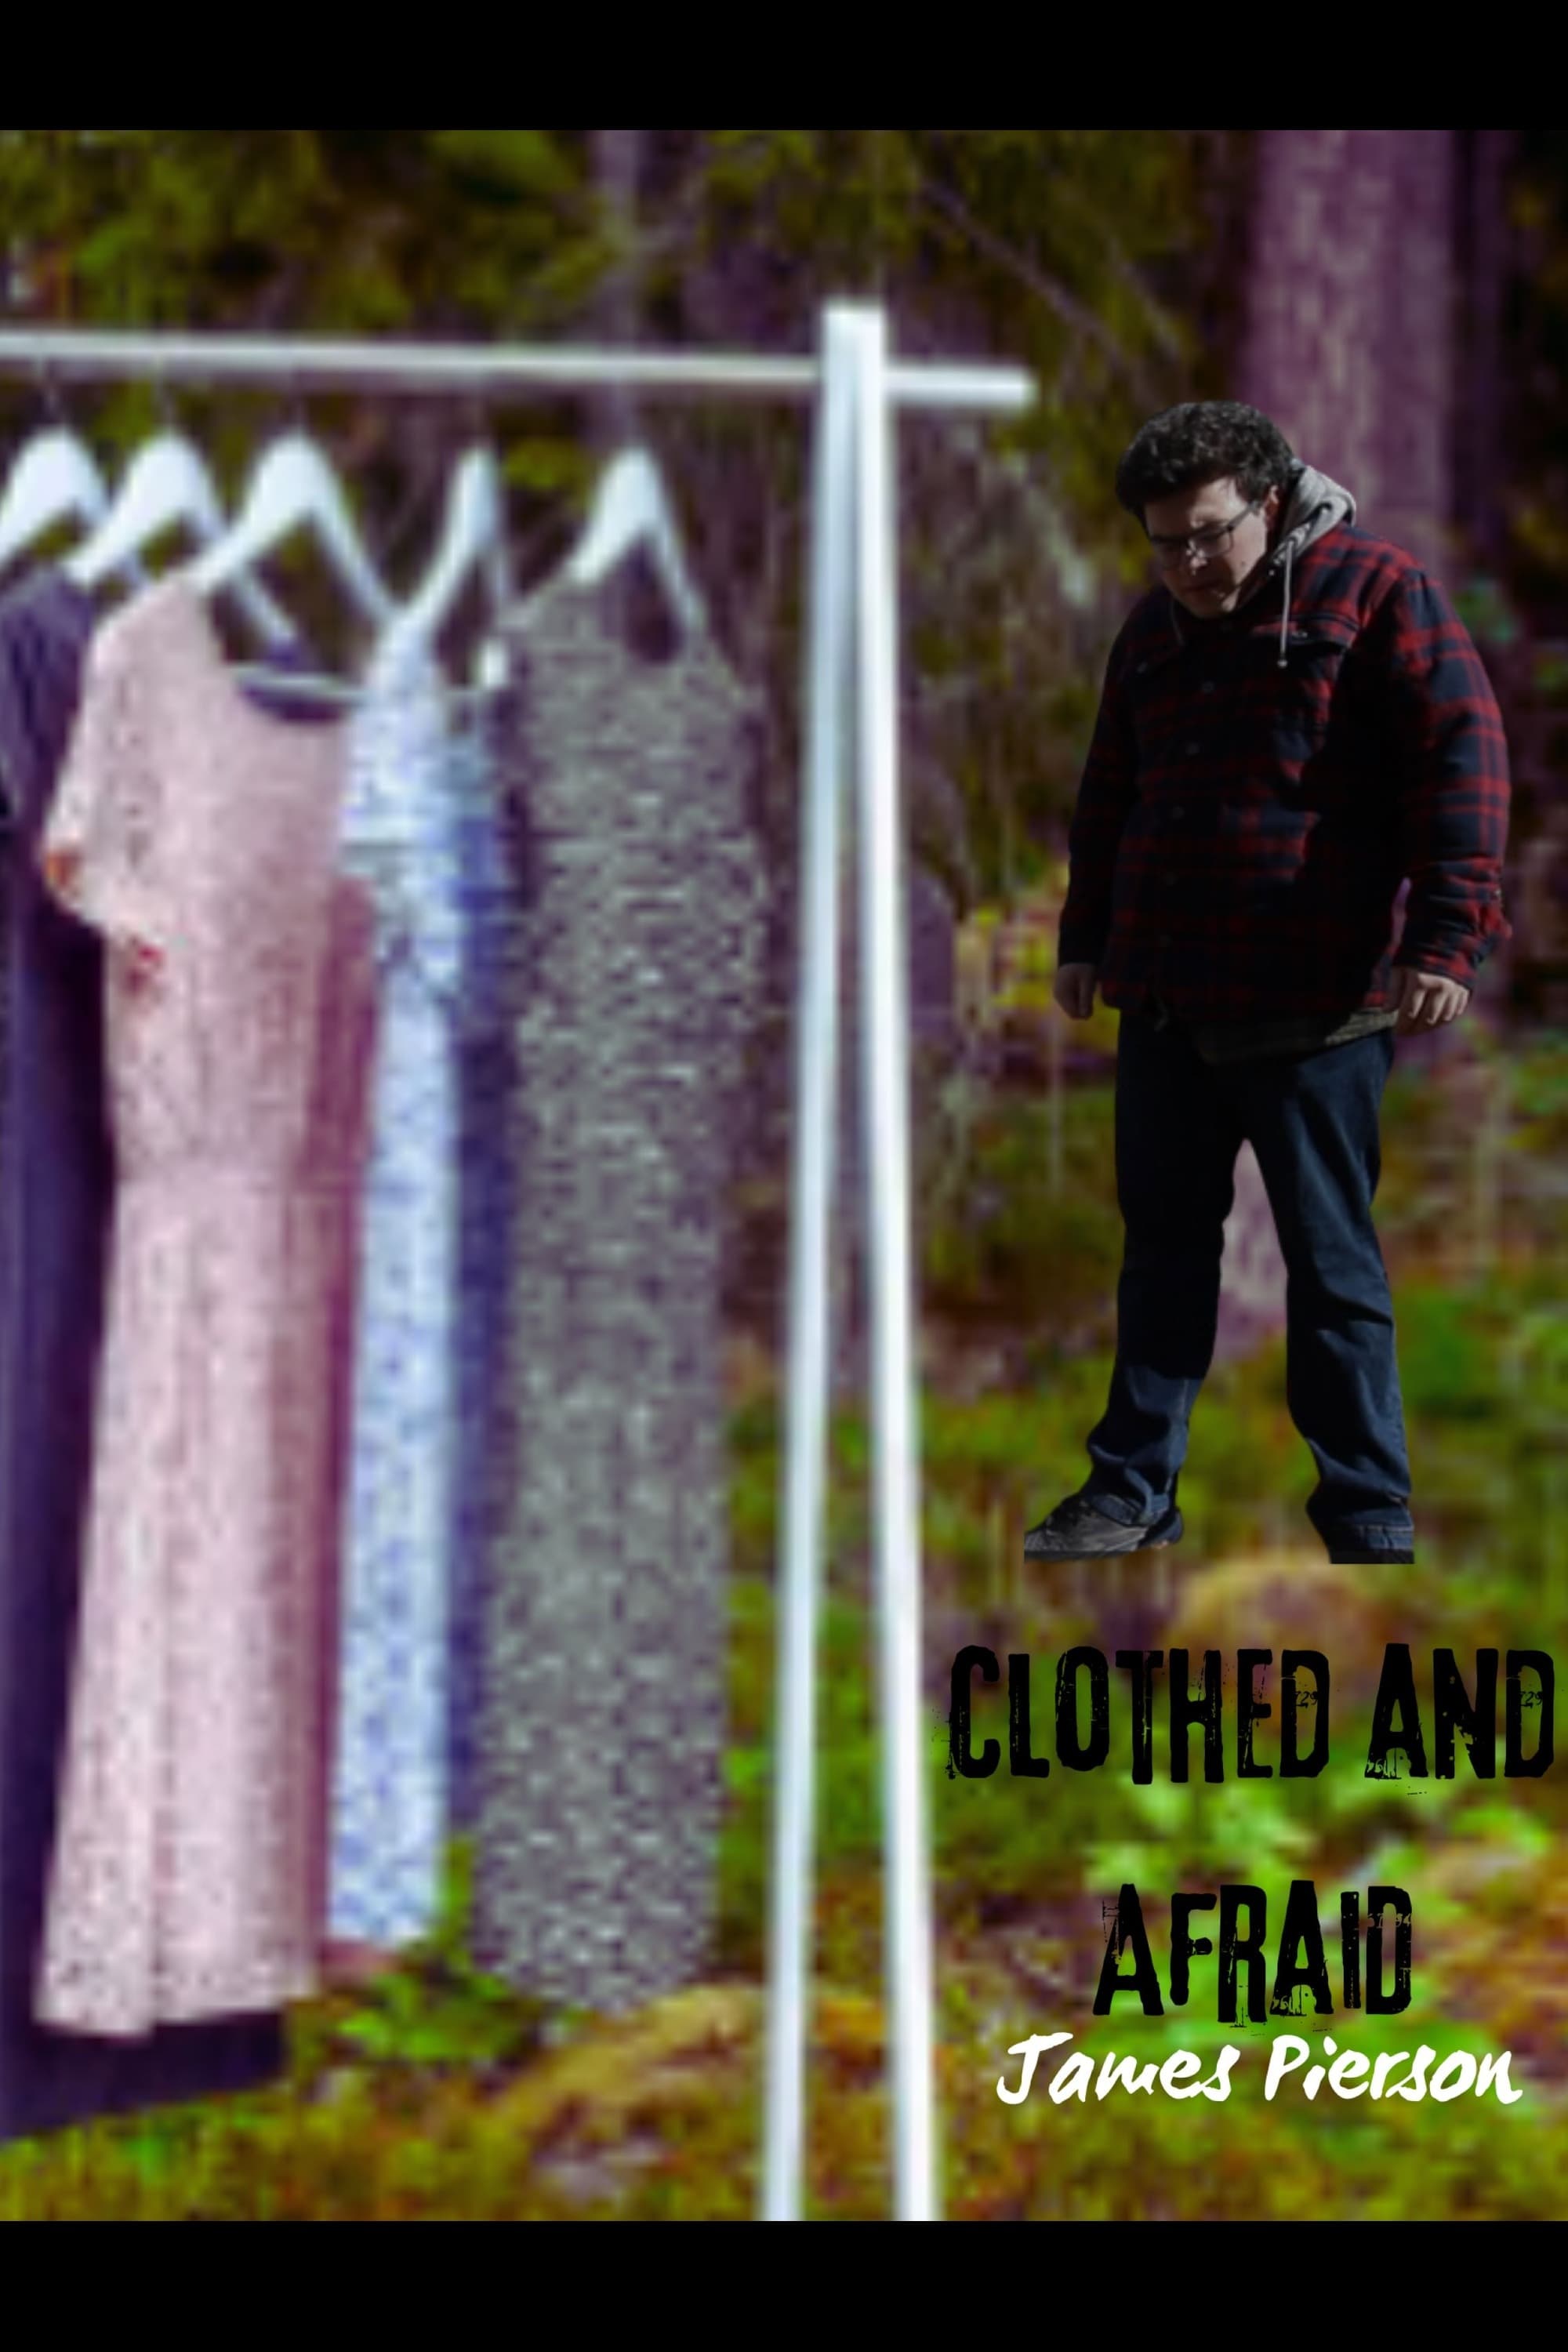 Clothed and Afraid